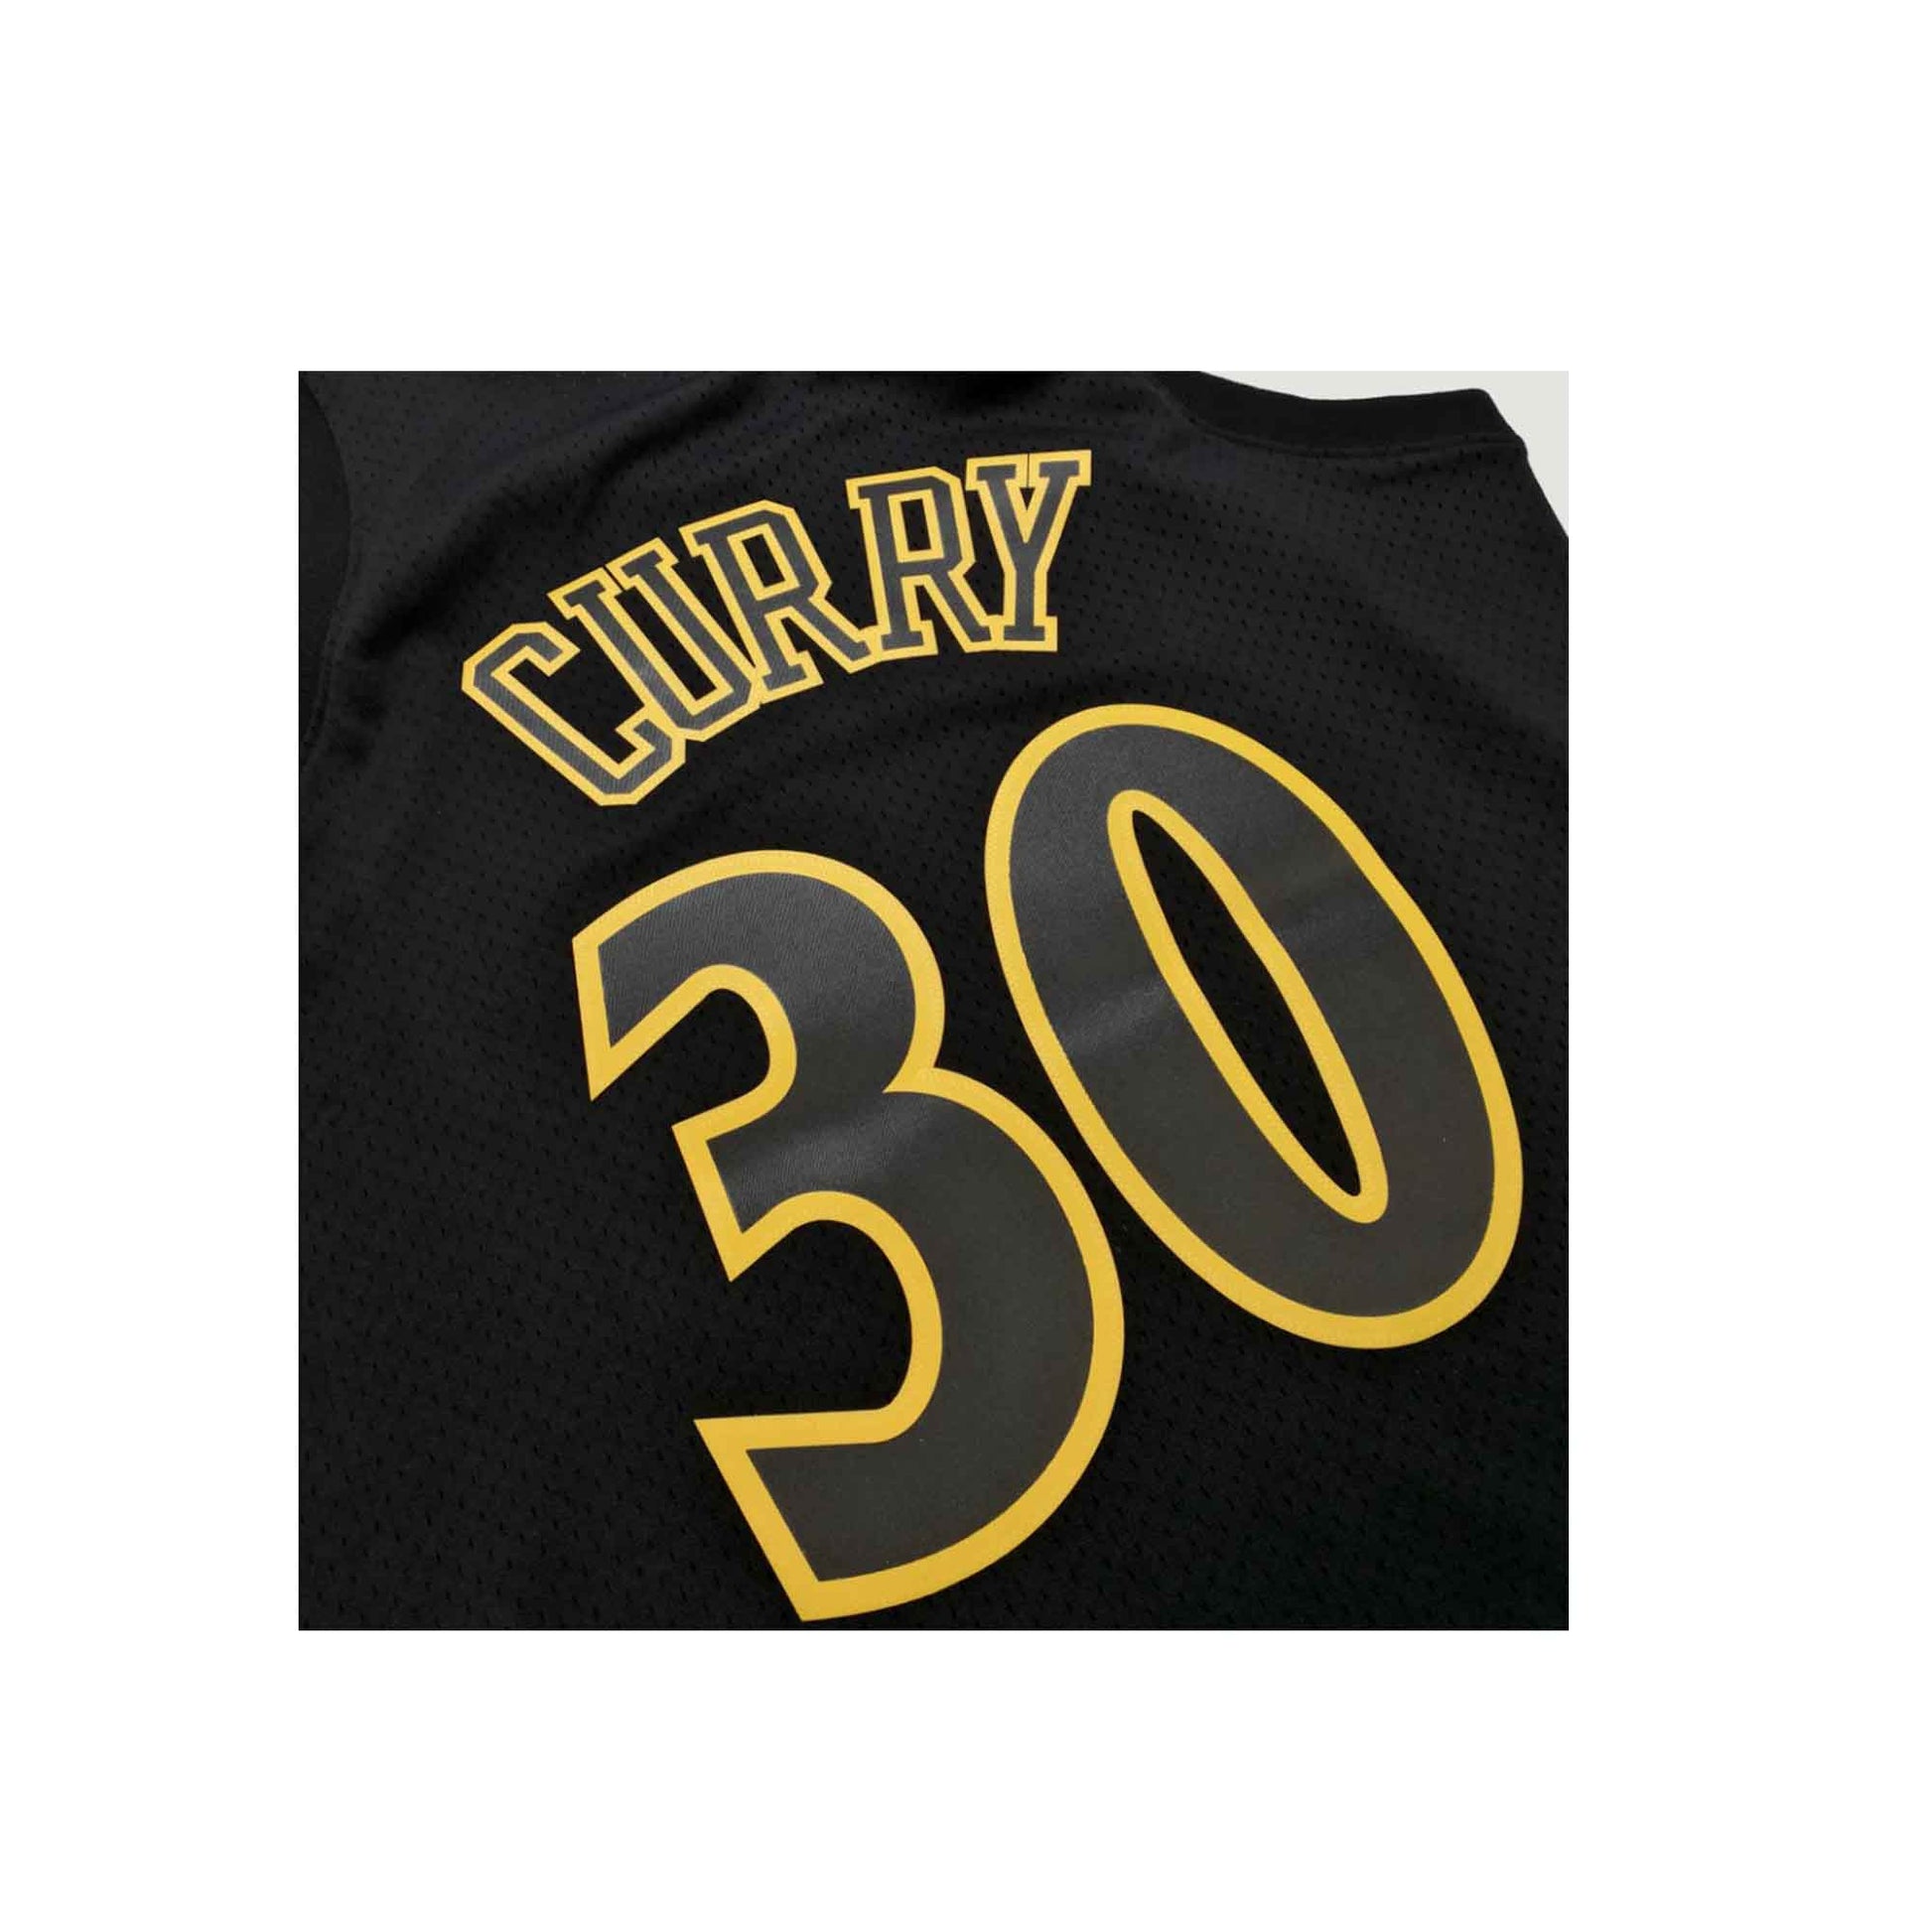 Stephen Curry #30 Golden State Warriors Jersey Magnet for Sale by